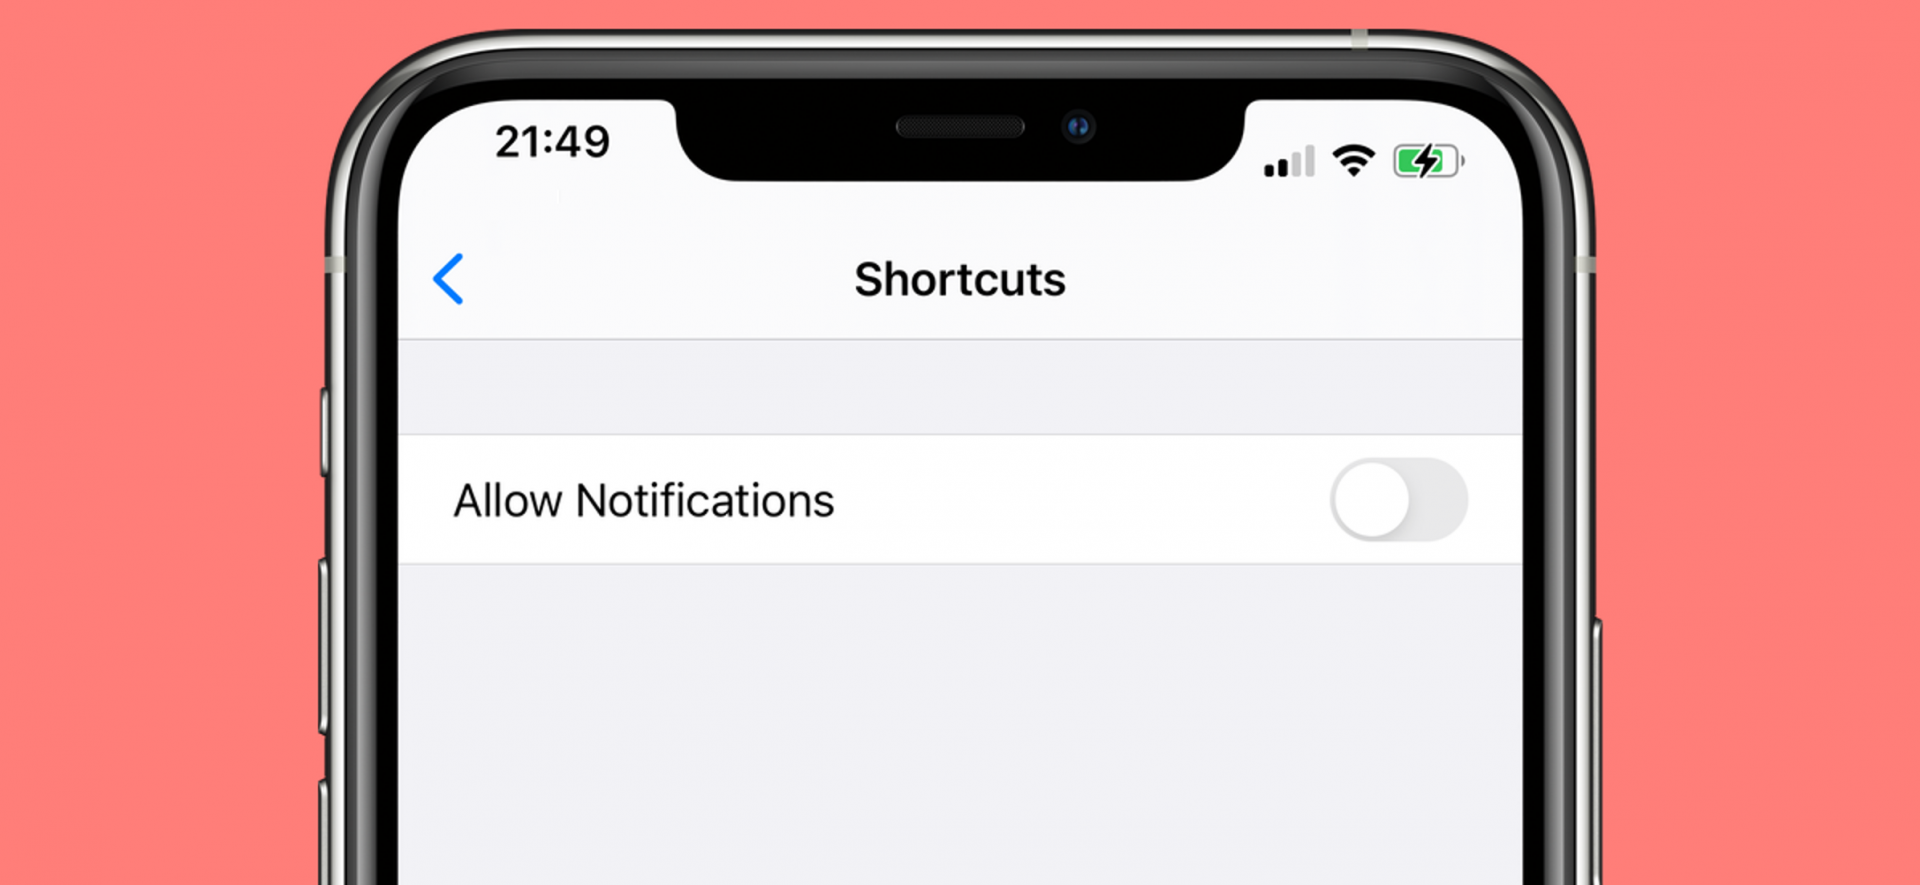 Learn how to Disable Notifications for the Shortcuts App on iPhone